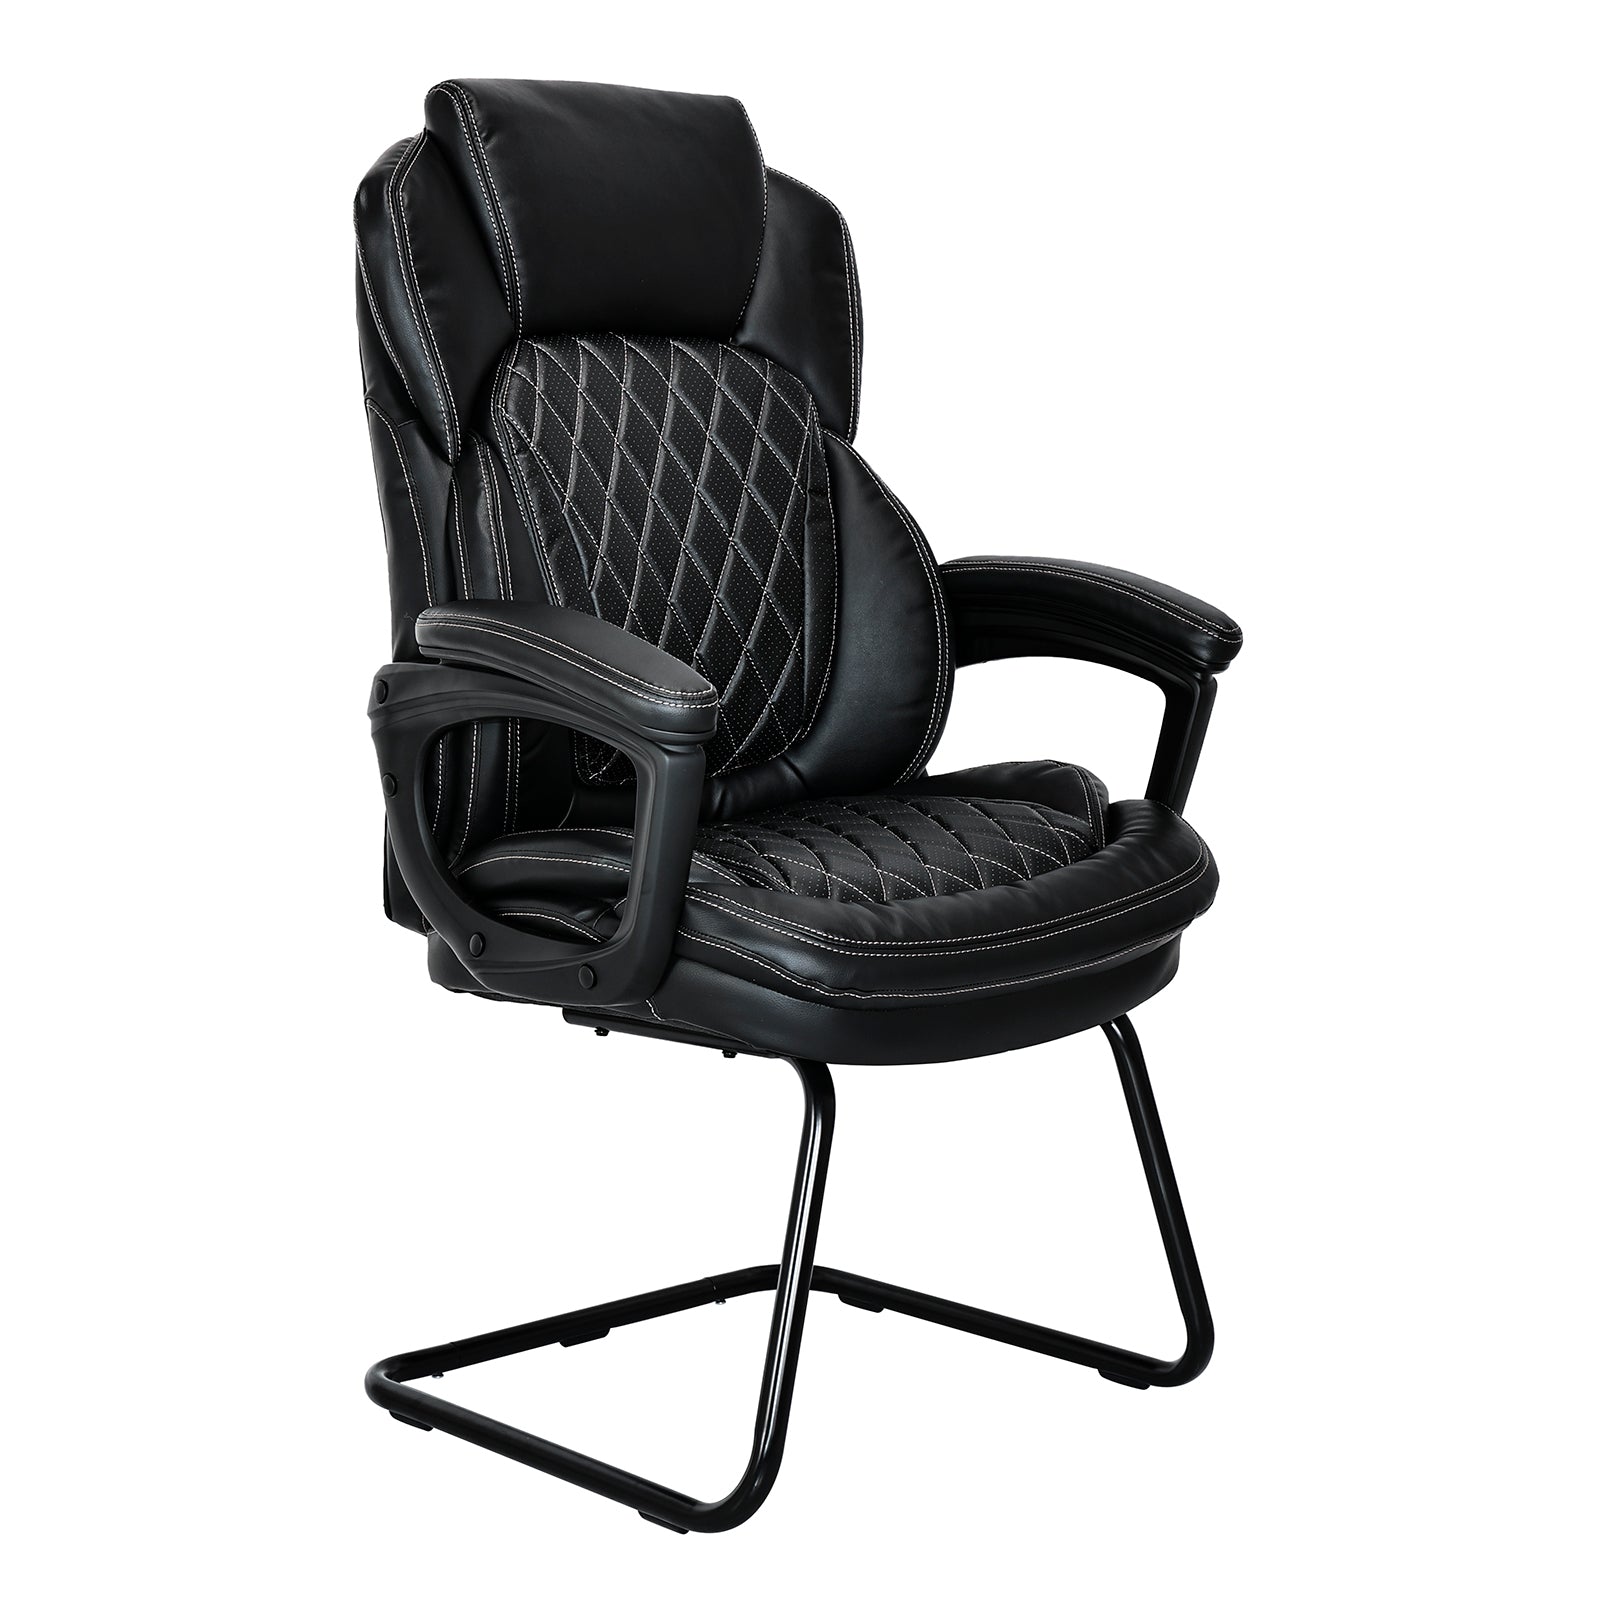 VOFFOV® Office Guest Chair All Day Comfort Ergonomic Lumbar Support, Bonded Leather, Black